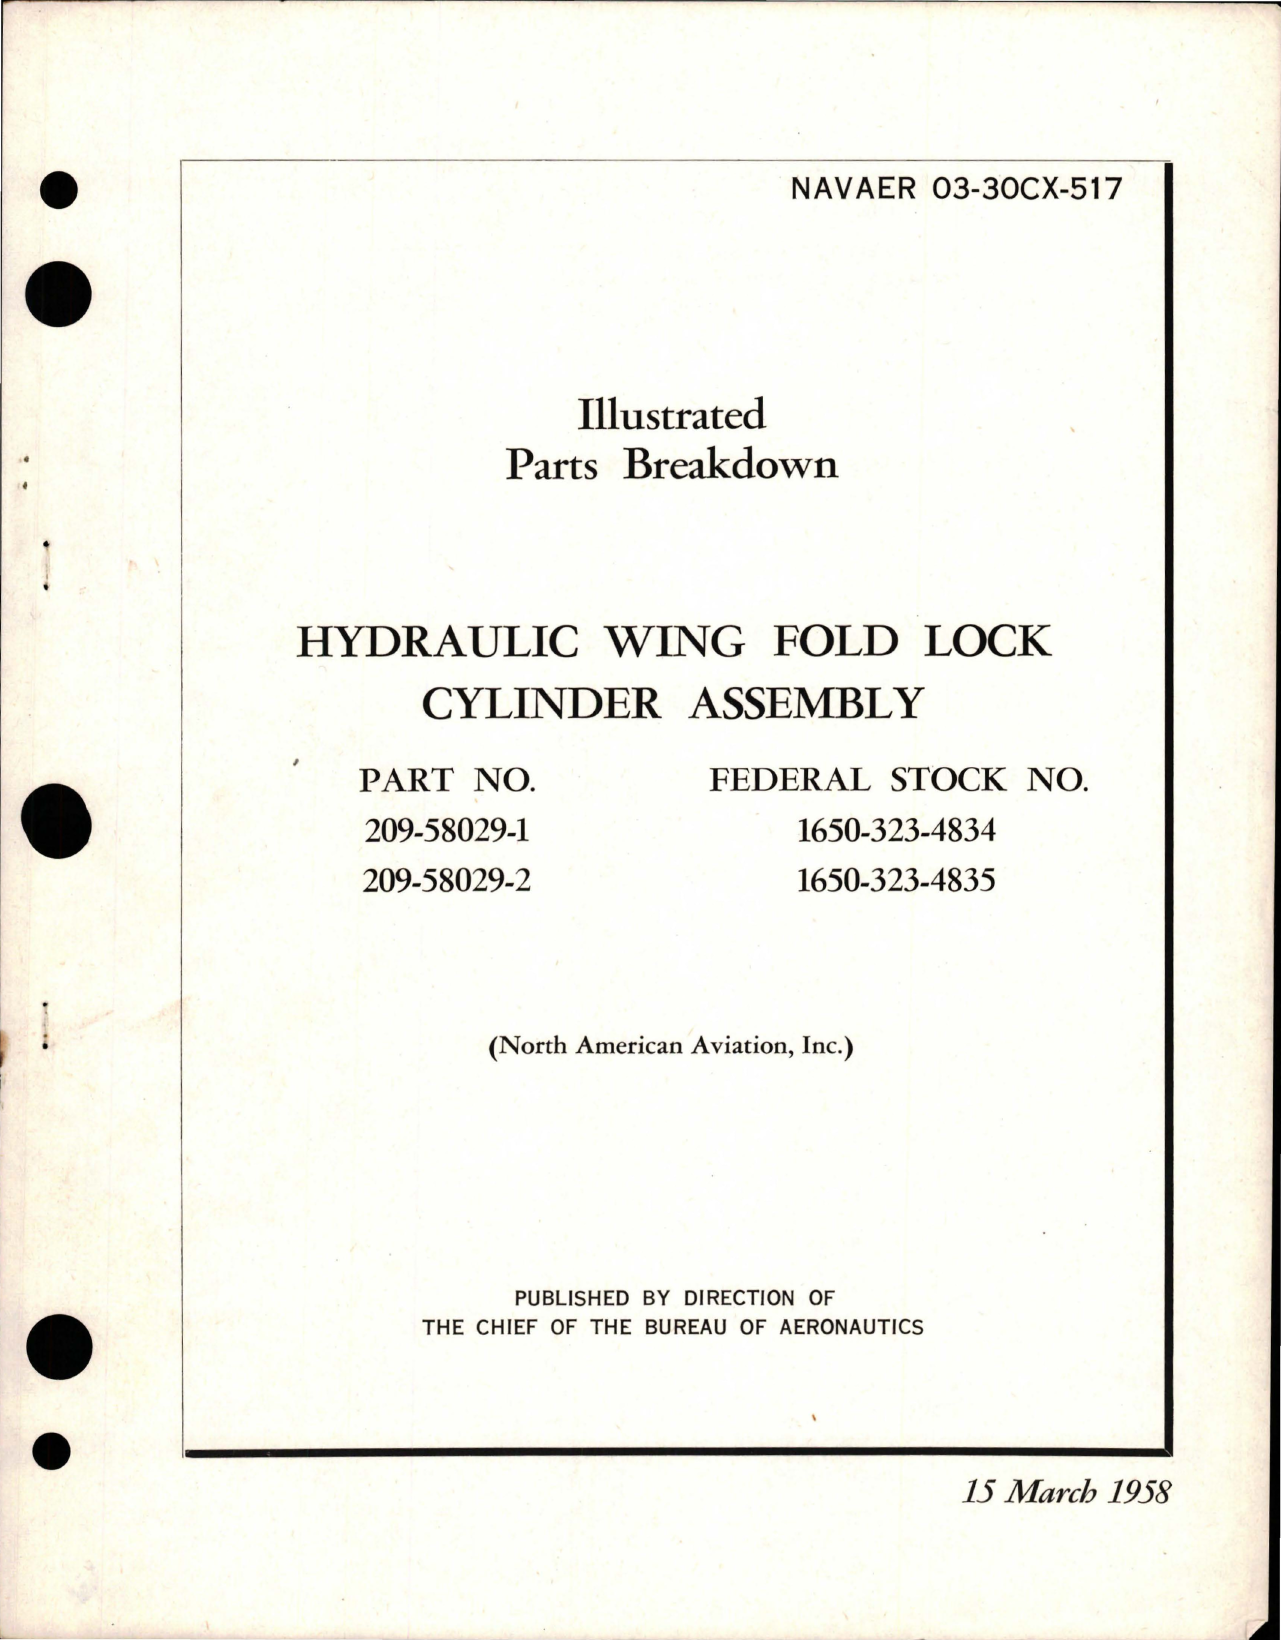 Sample page 1 from AirCorps Library document: Illustrated Parts Breakdown for Hydraulic Wing Fold Lock Cylinder Assembly - 209-58029-1, 209-58029-2